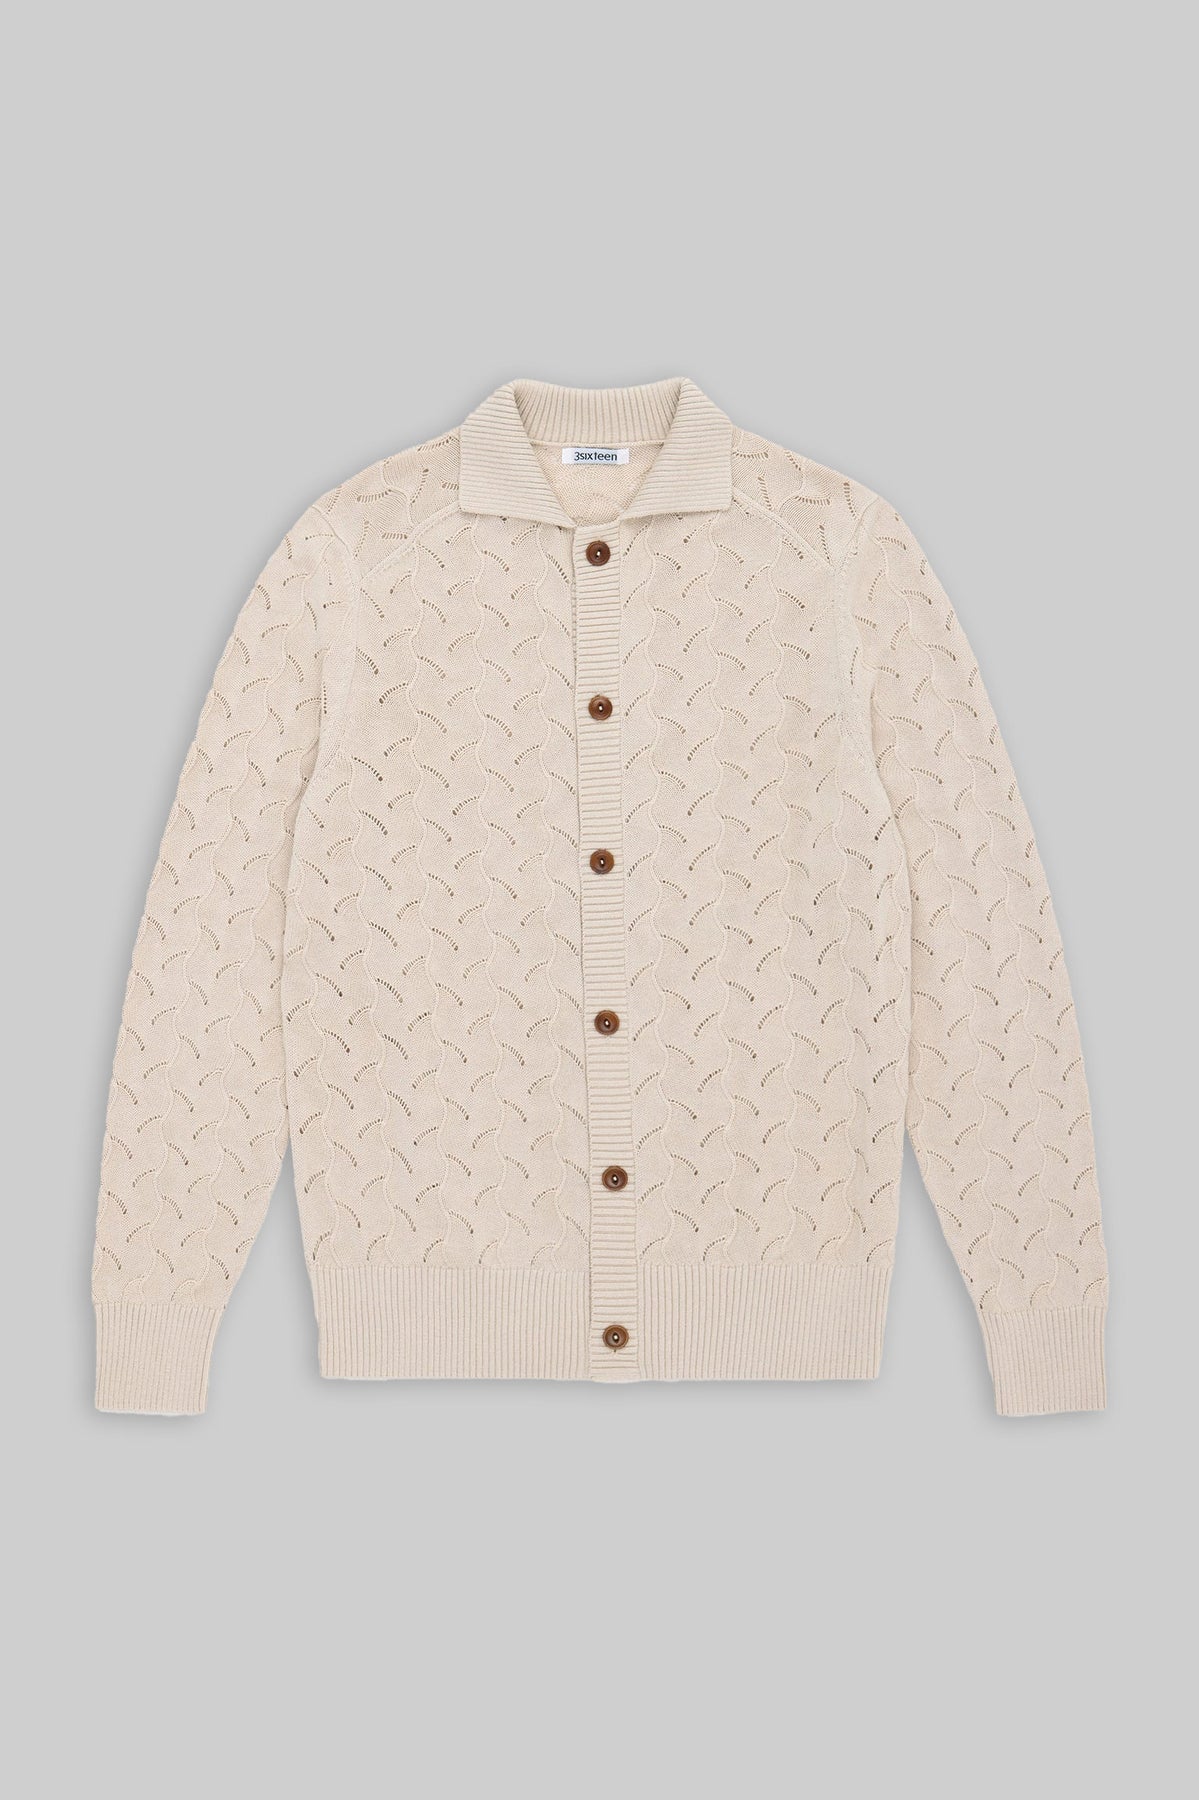 3Sixteen Collared Cardigan (Natural Lace Knit)